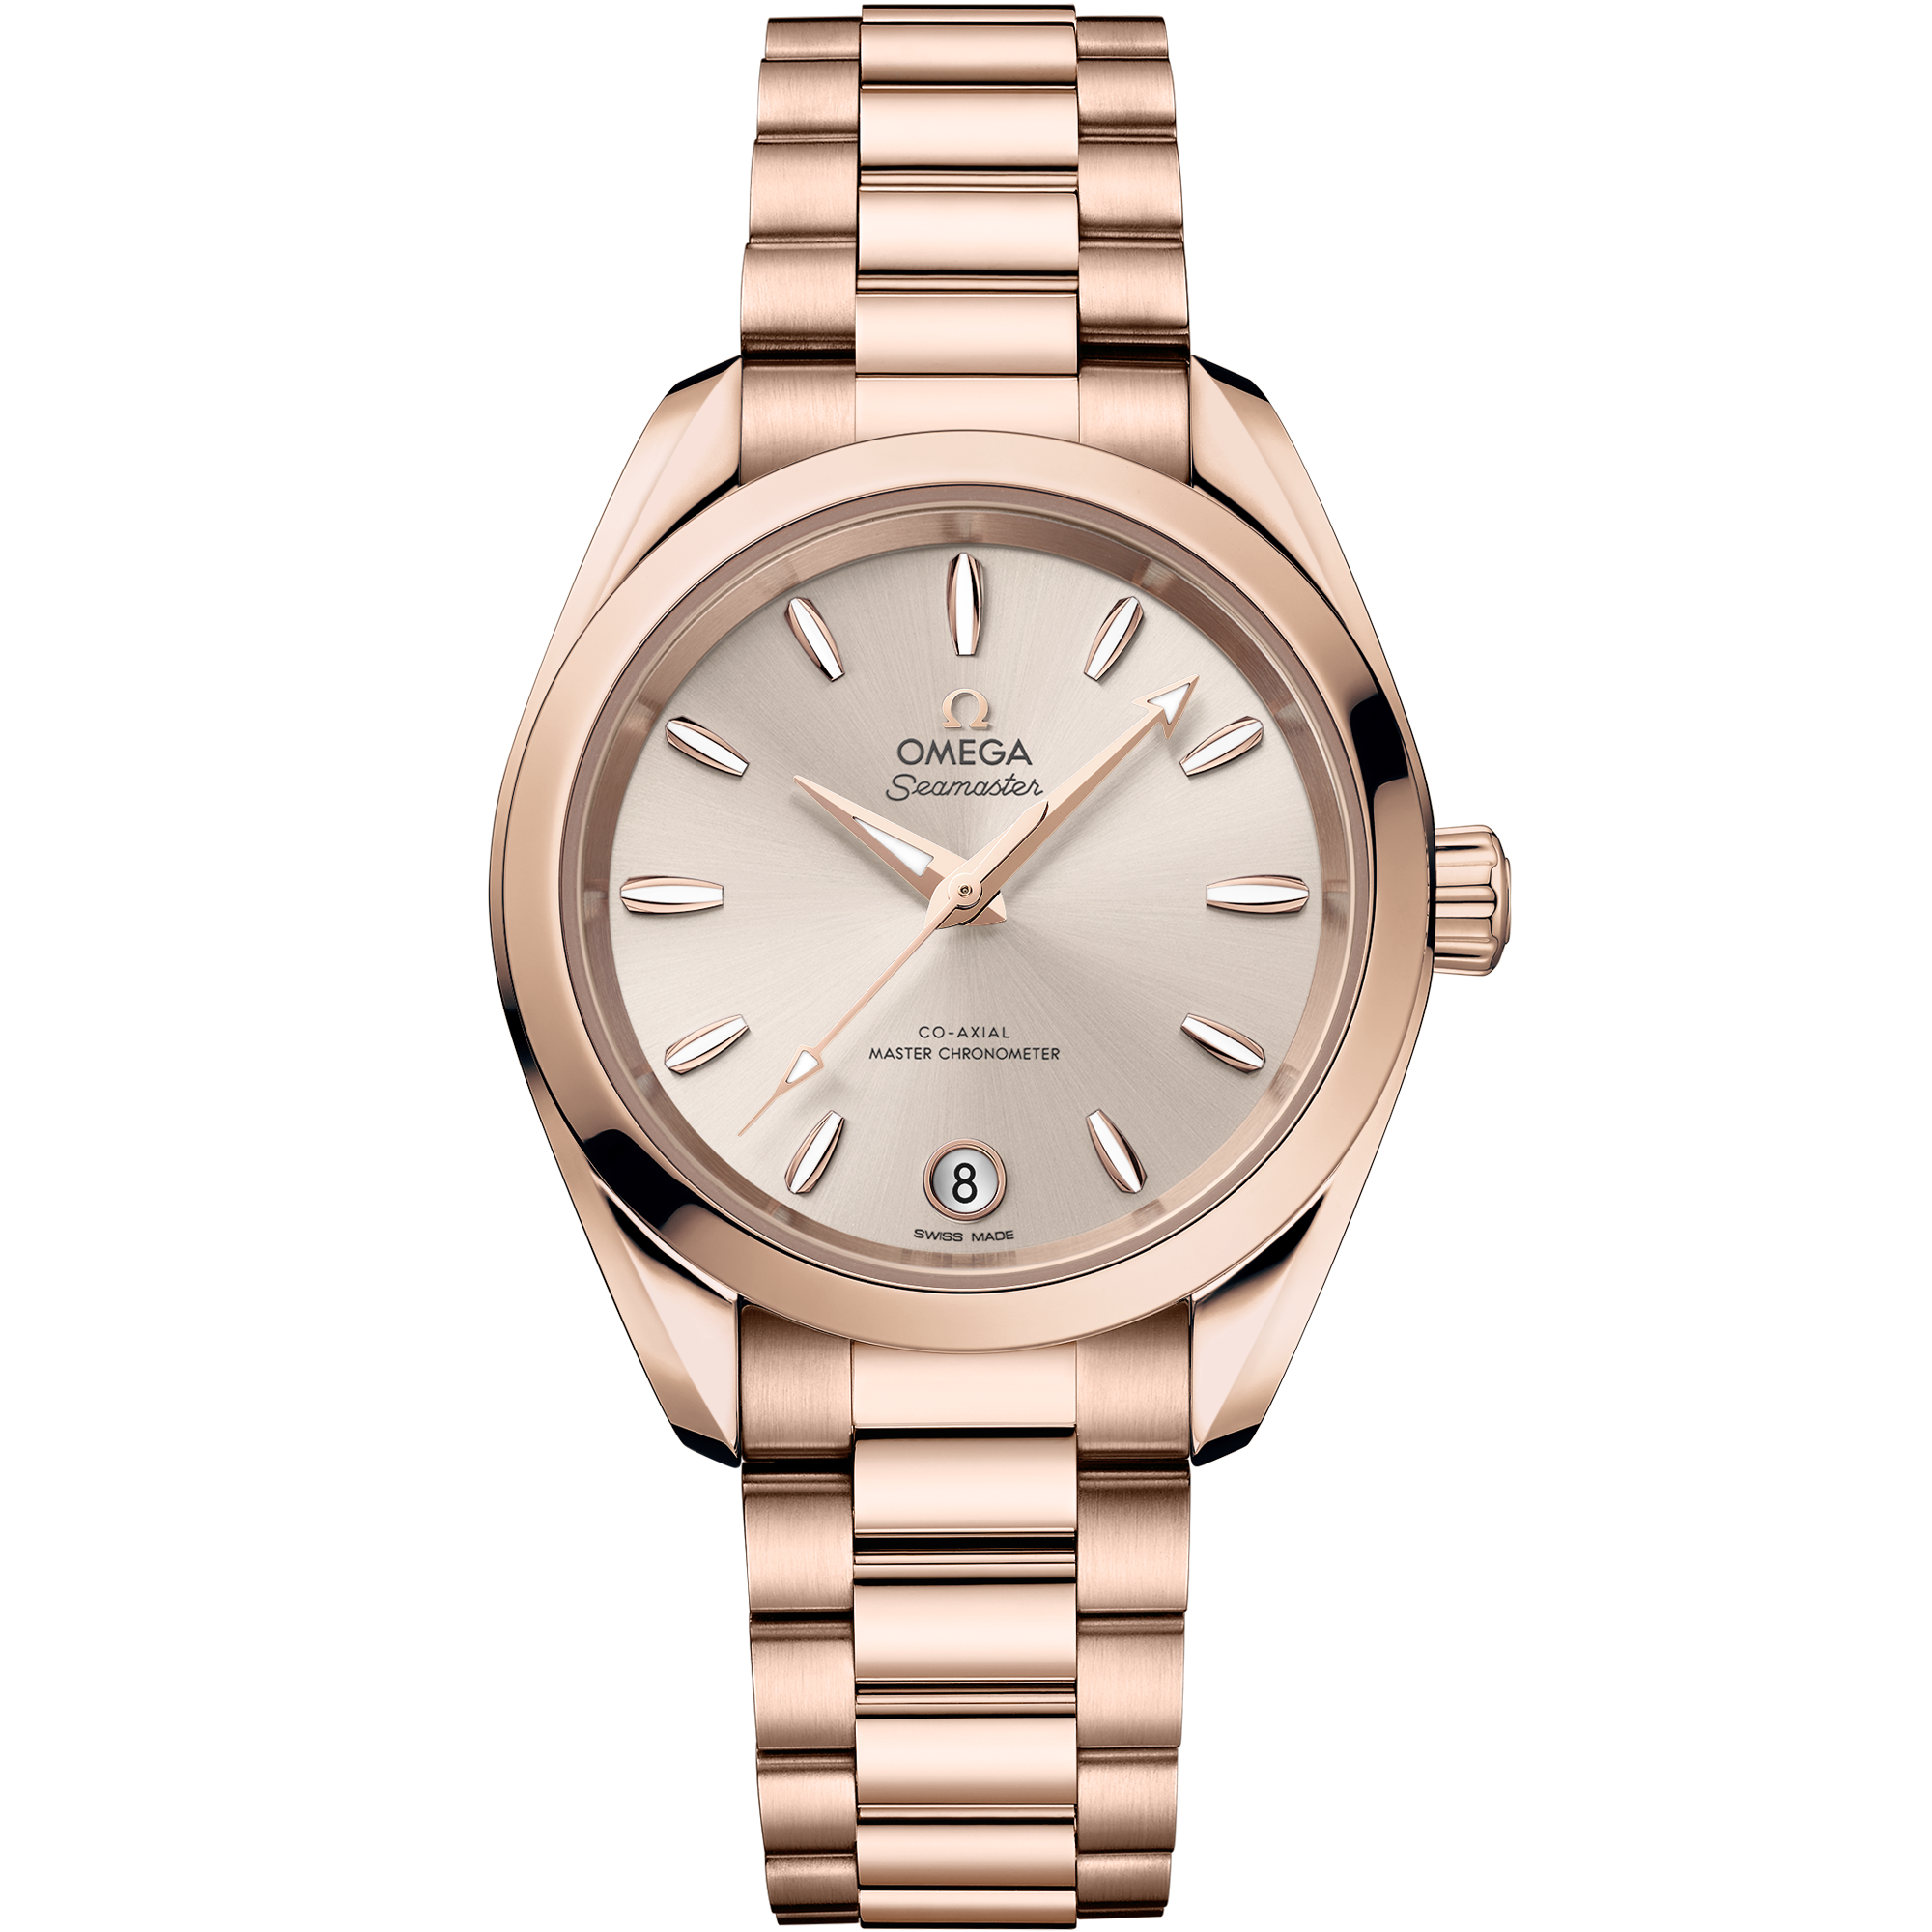 Seamaster 34 mm, ouro Sedna™ em ouro Sedna™ - 220.50.34.20.09.001